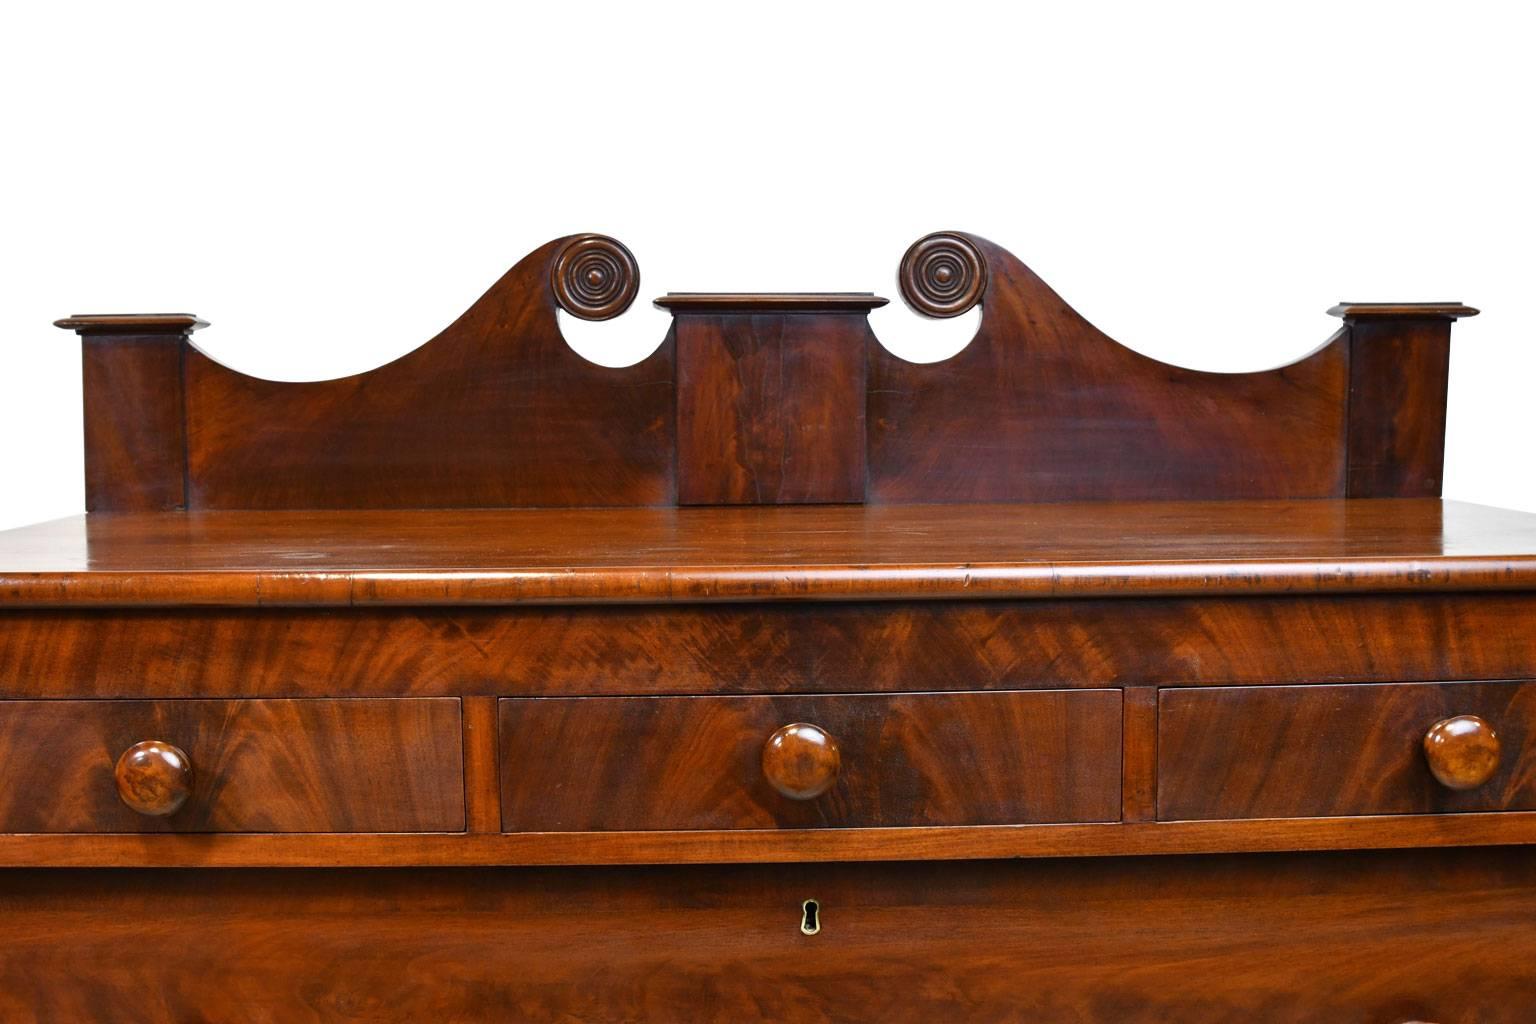 A lovely Sheraton chest in mahogany with three small drawers over four drawers of varying depths cross banded with mahogany. Chest has original turned wooden knobs, backsplash with scrolled split-pediment top, and turned feet, American, circa